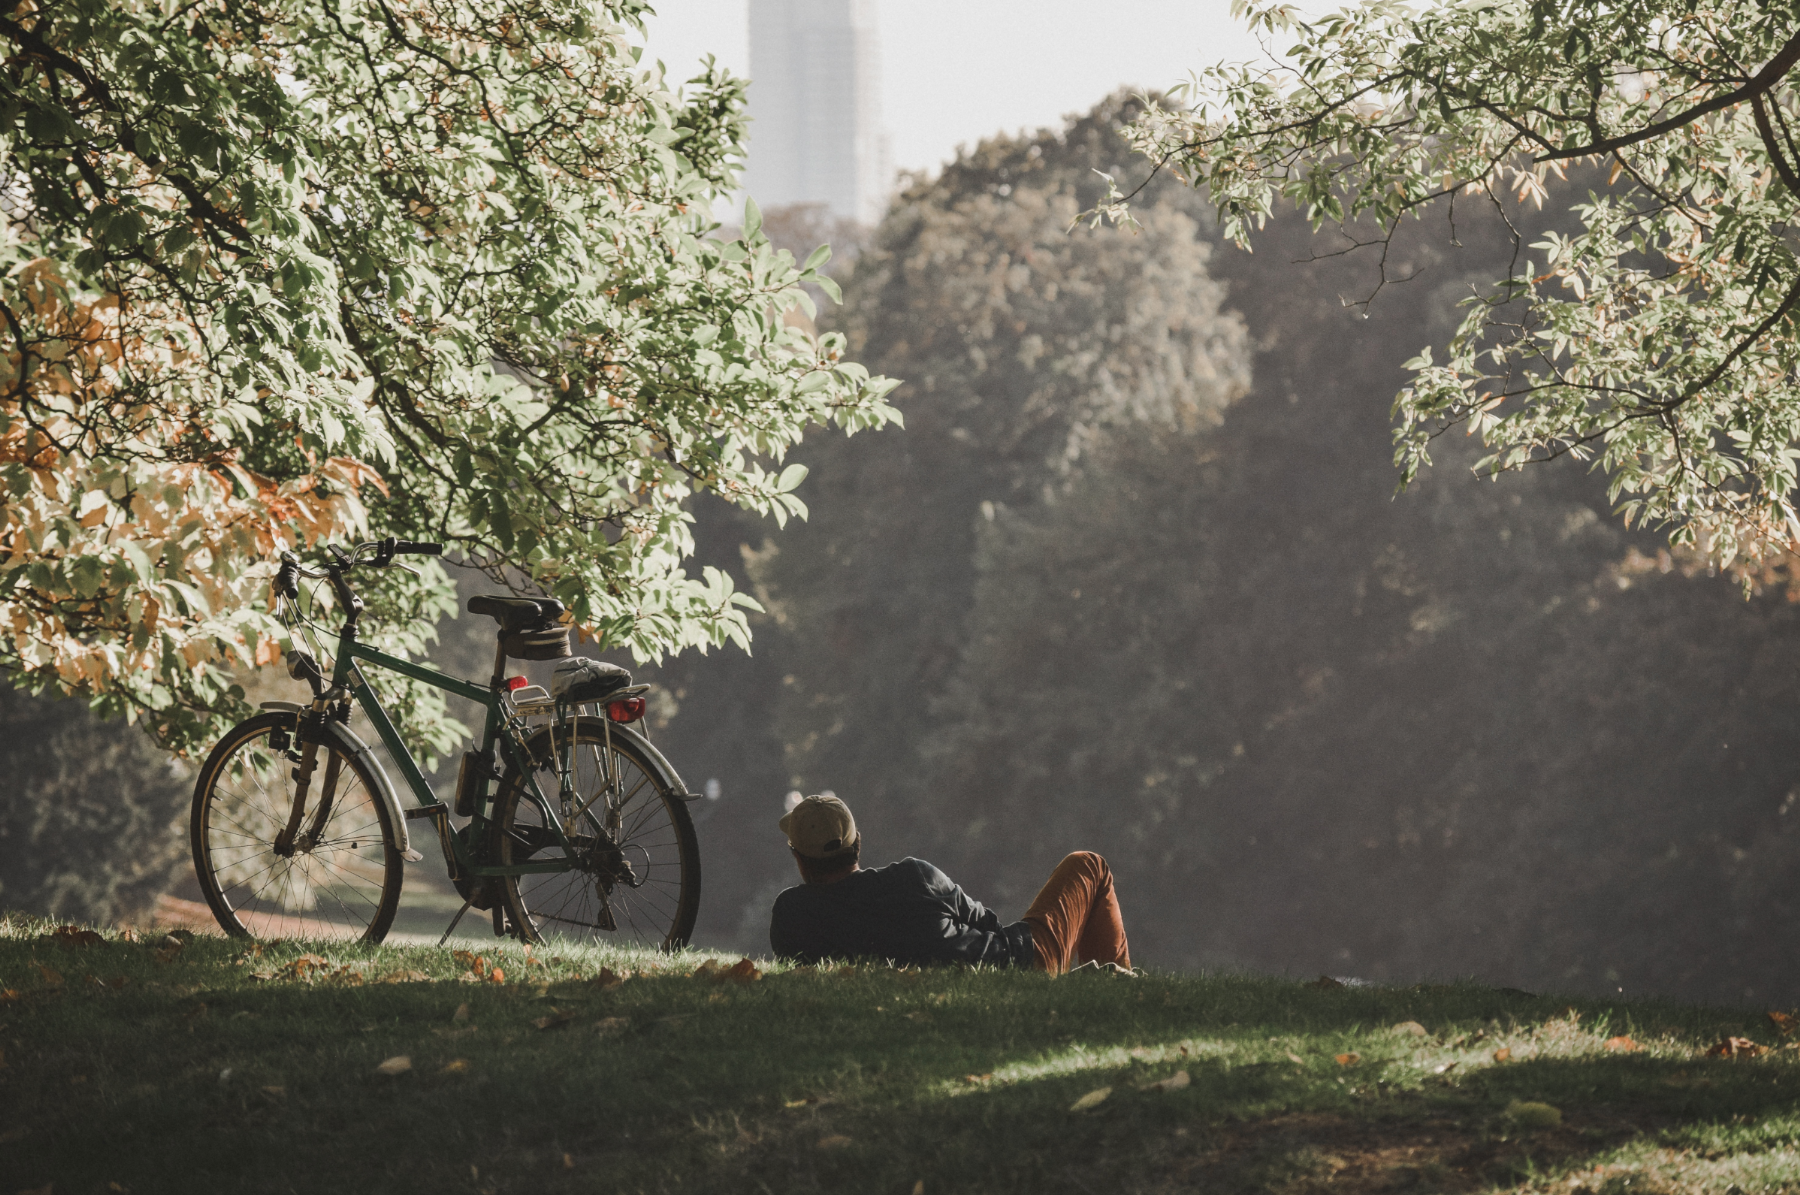 Resting under a tree with a bicycle.